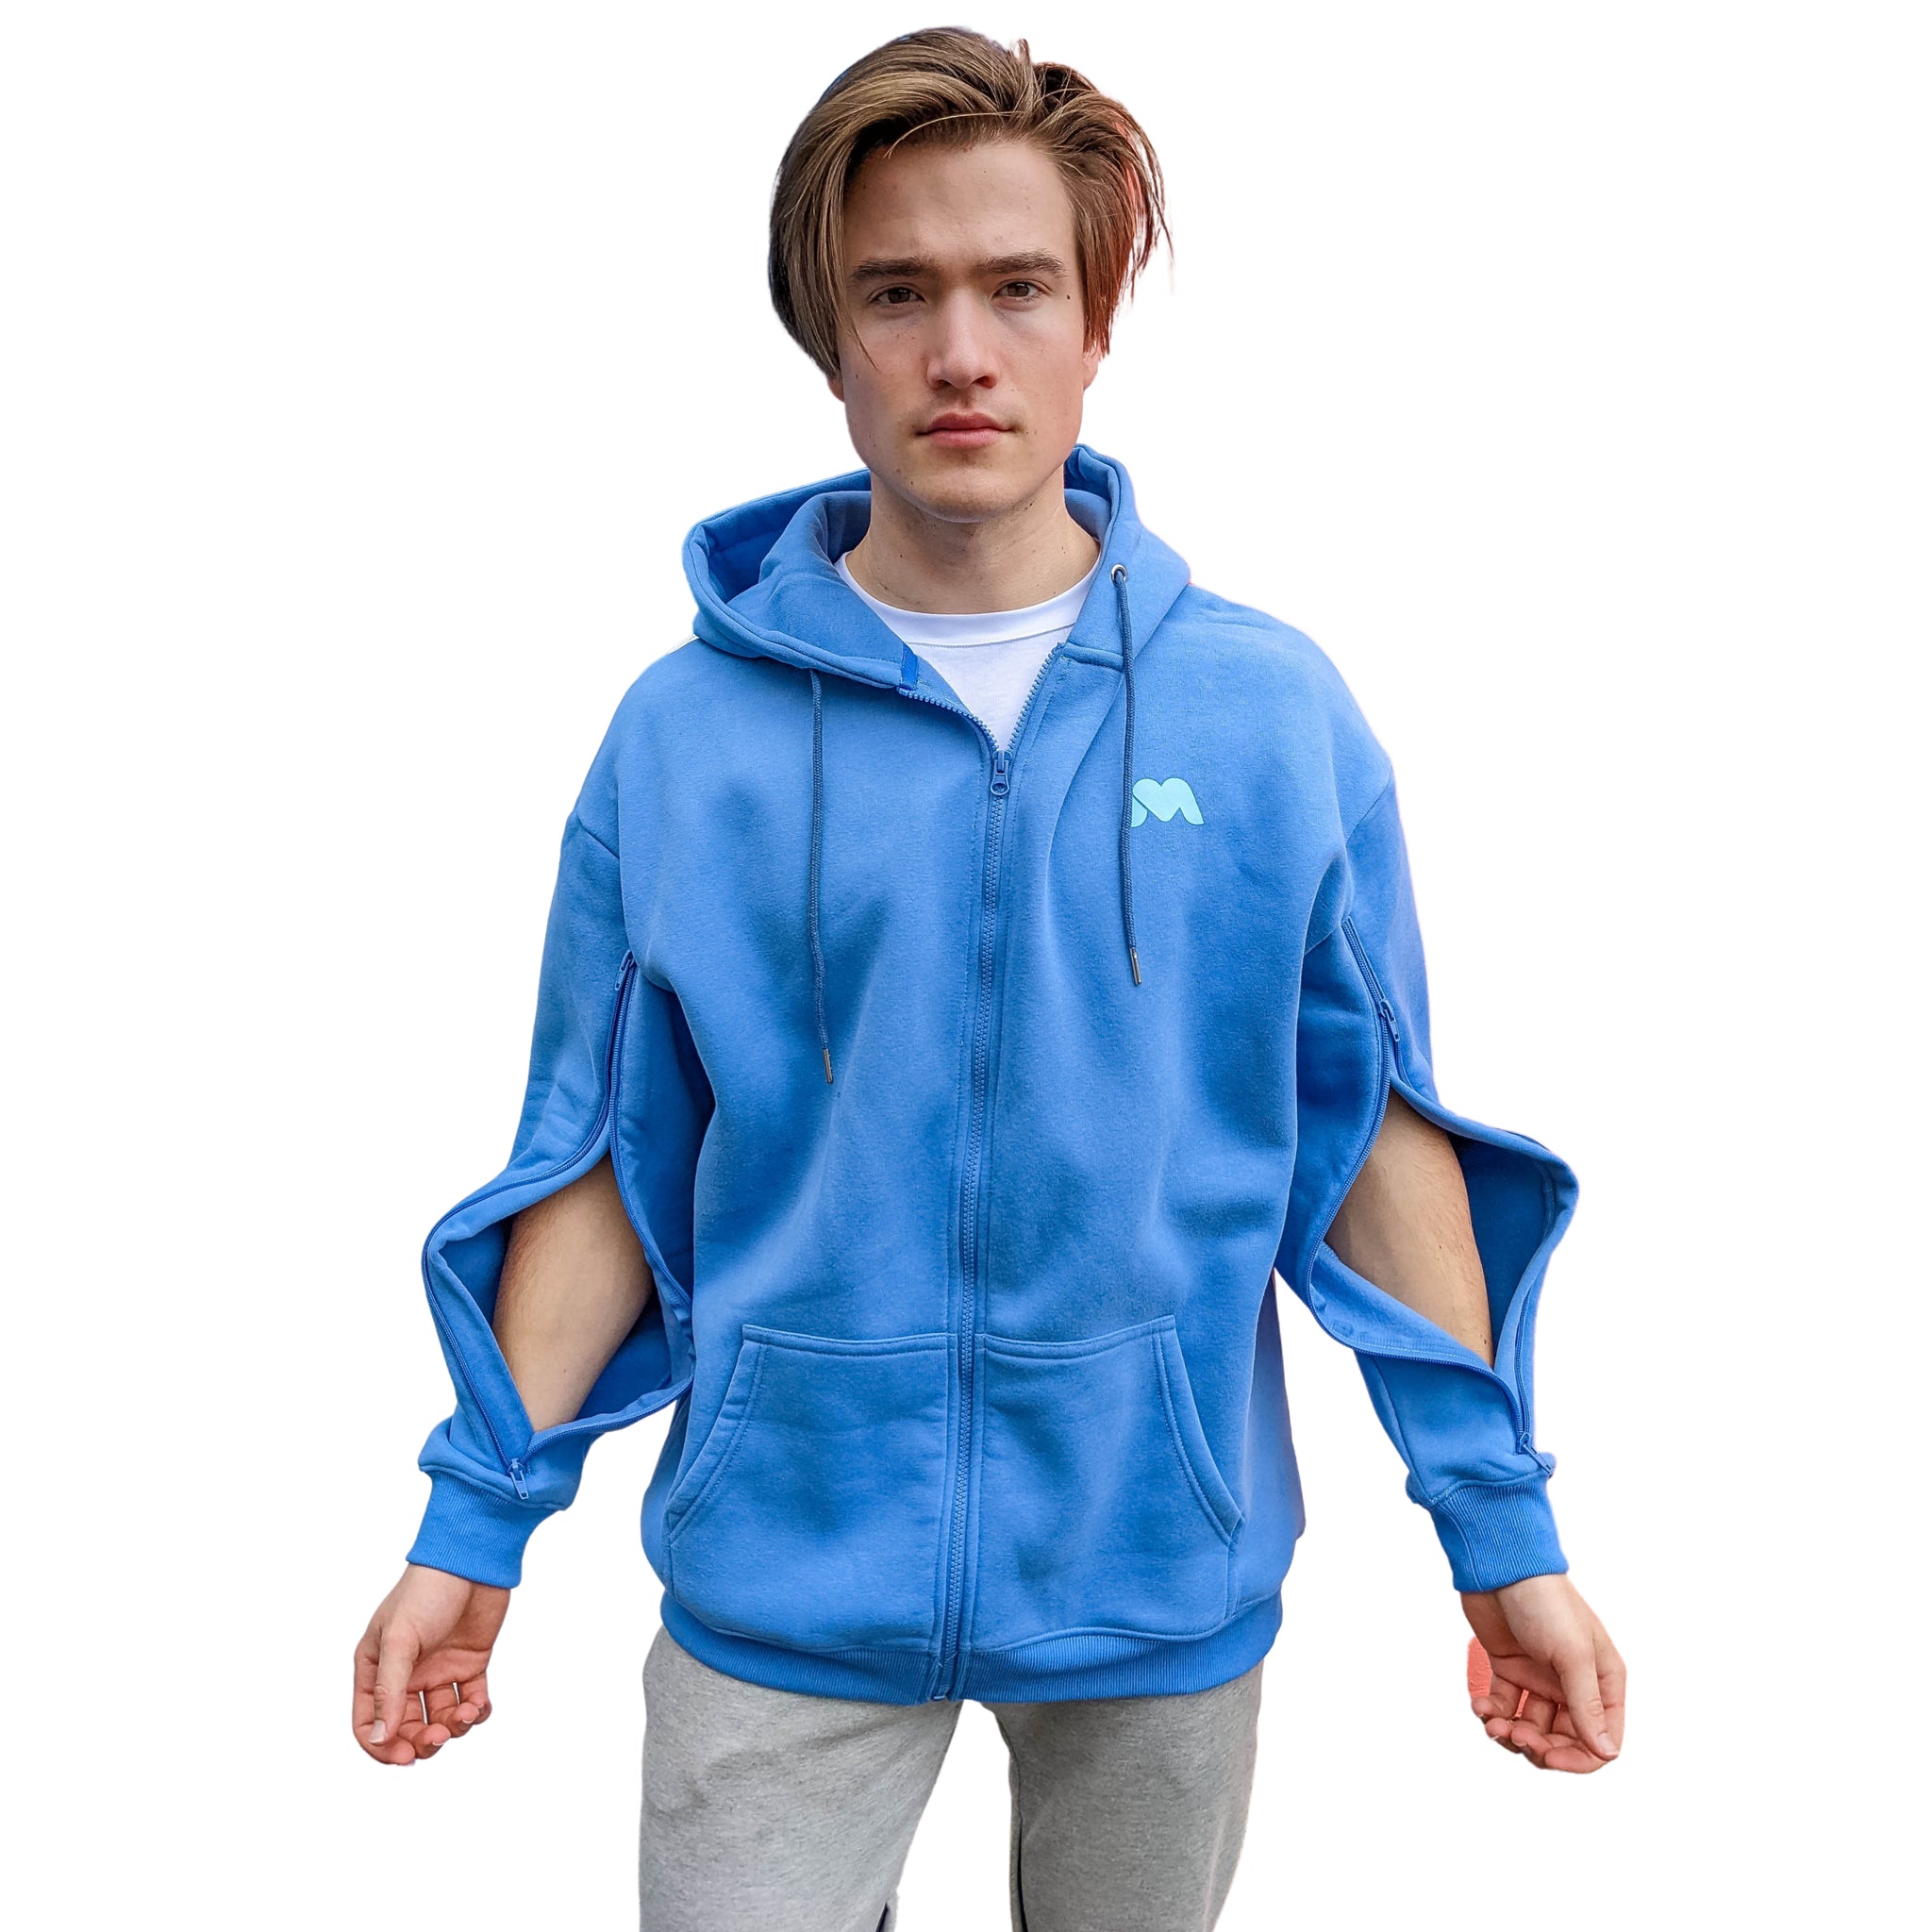 Oversized Hoodies Customized for Hemodialysis Patients with Both Arms –  MandMcares